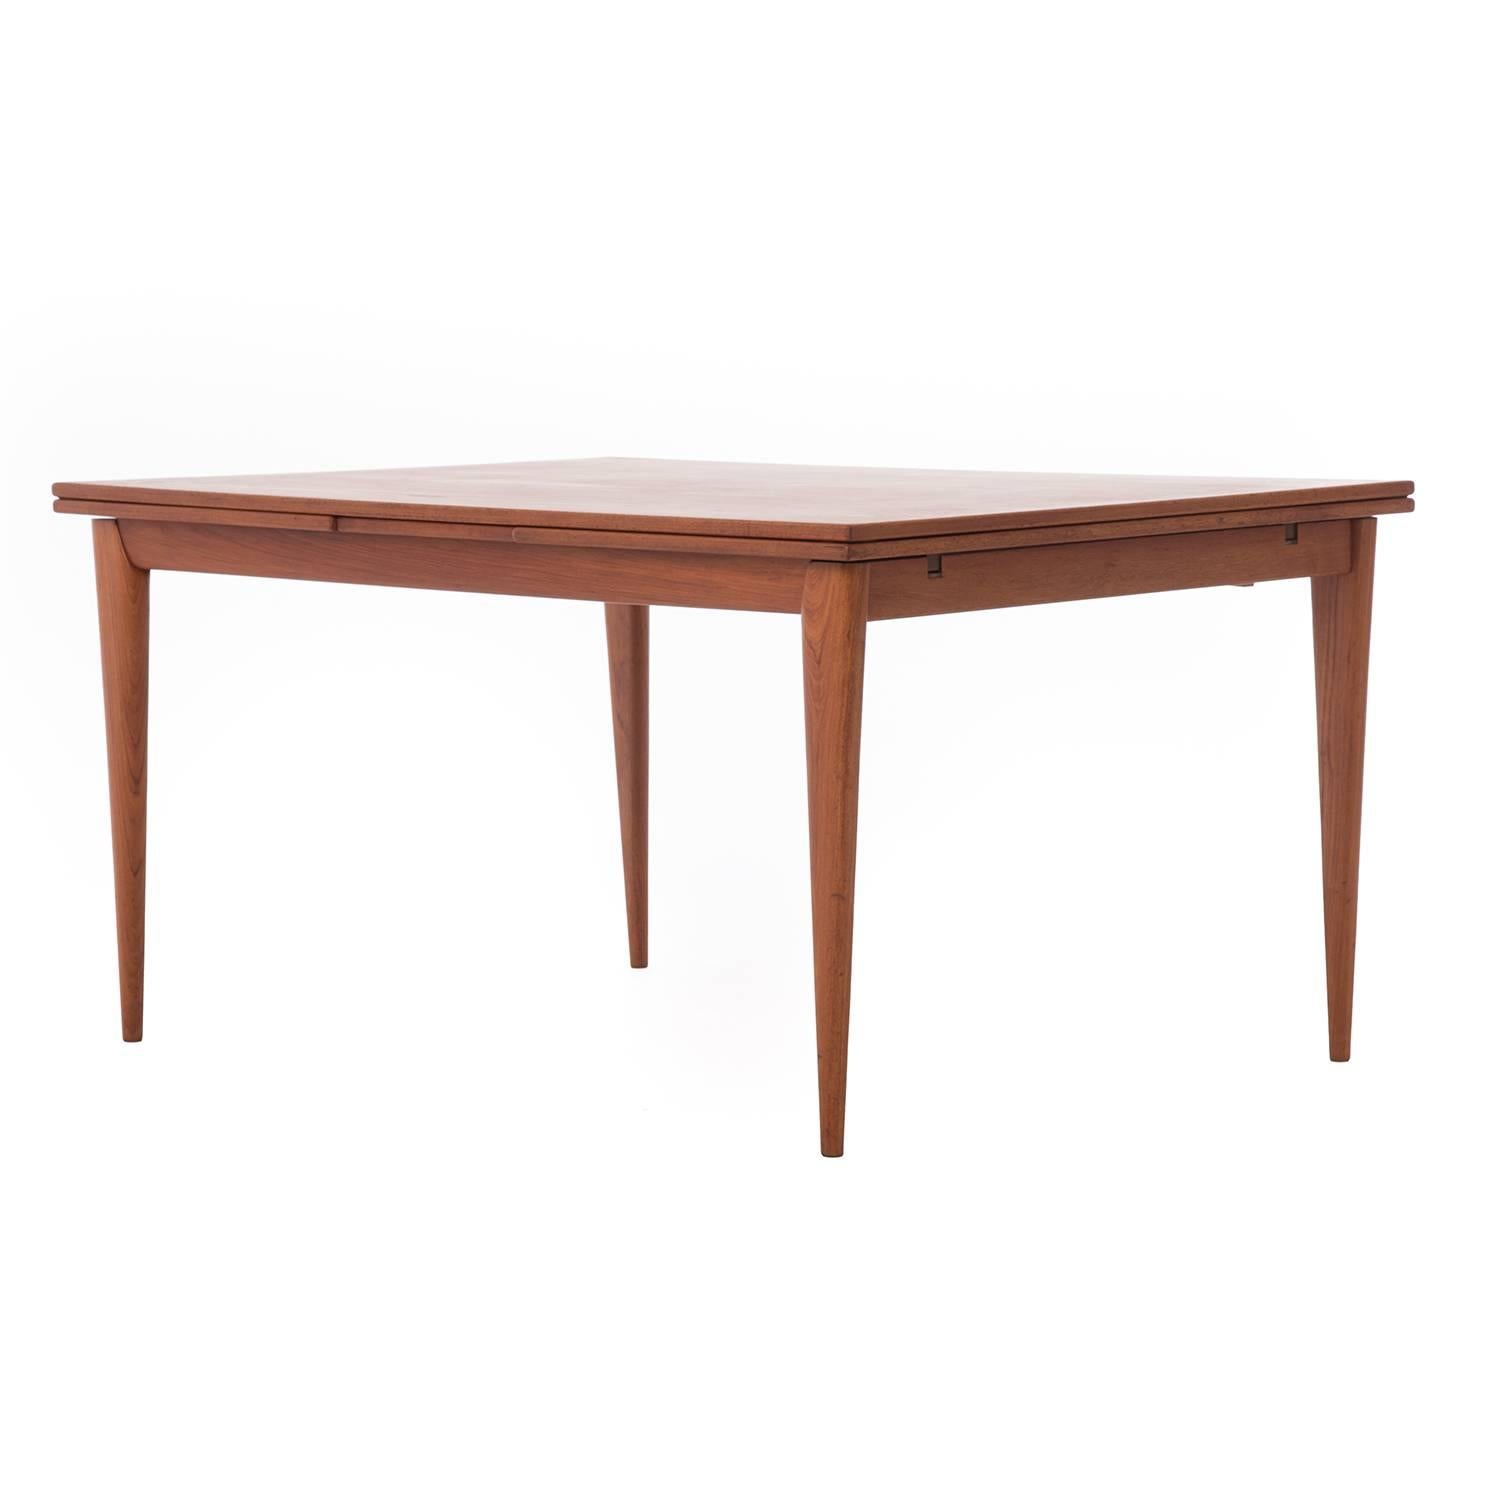 20th Century Danish Modern Extension Dining Table